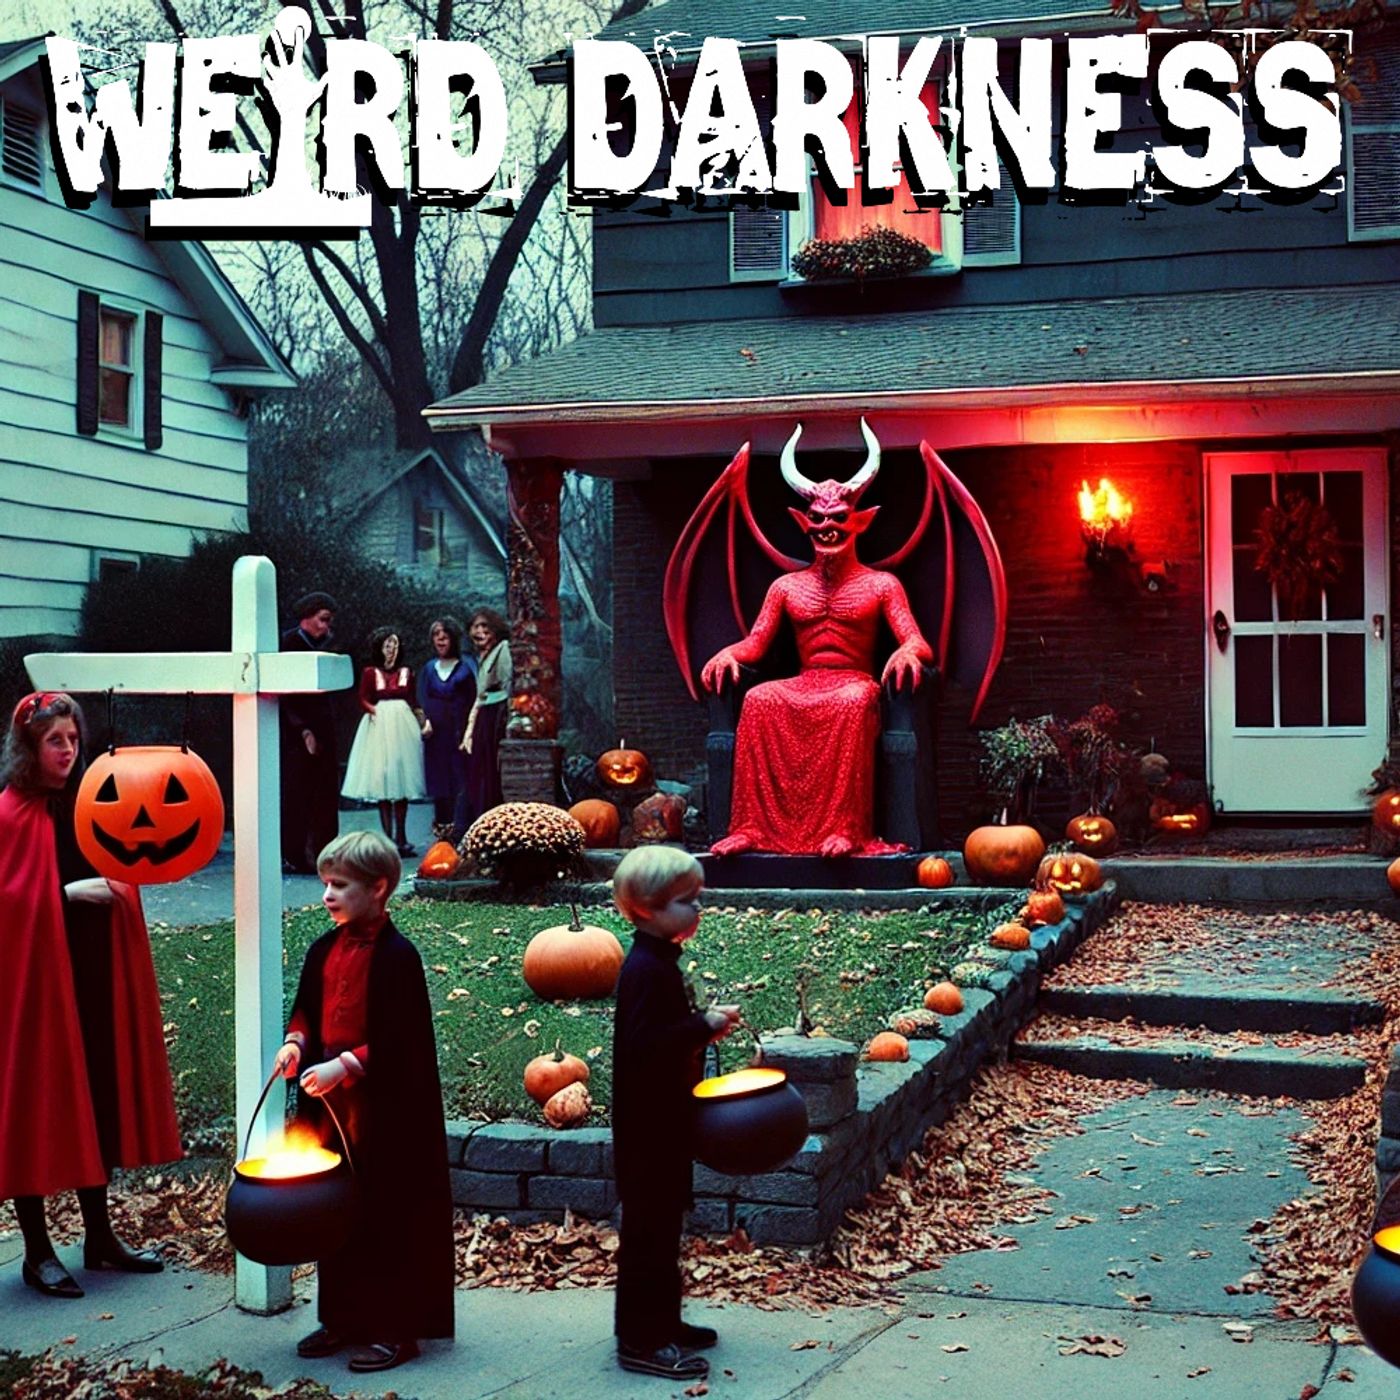 “SATAN’S FALL: A HALLOWEEN HORROR STORY” and More Paranormal Tales! #WeirdDarkness #Darkives